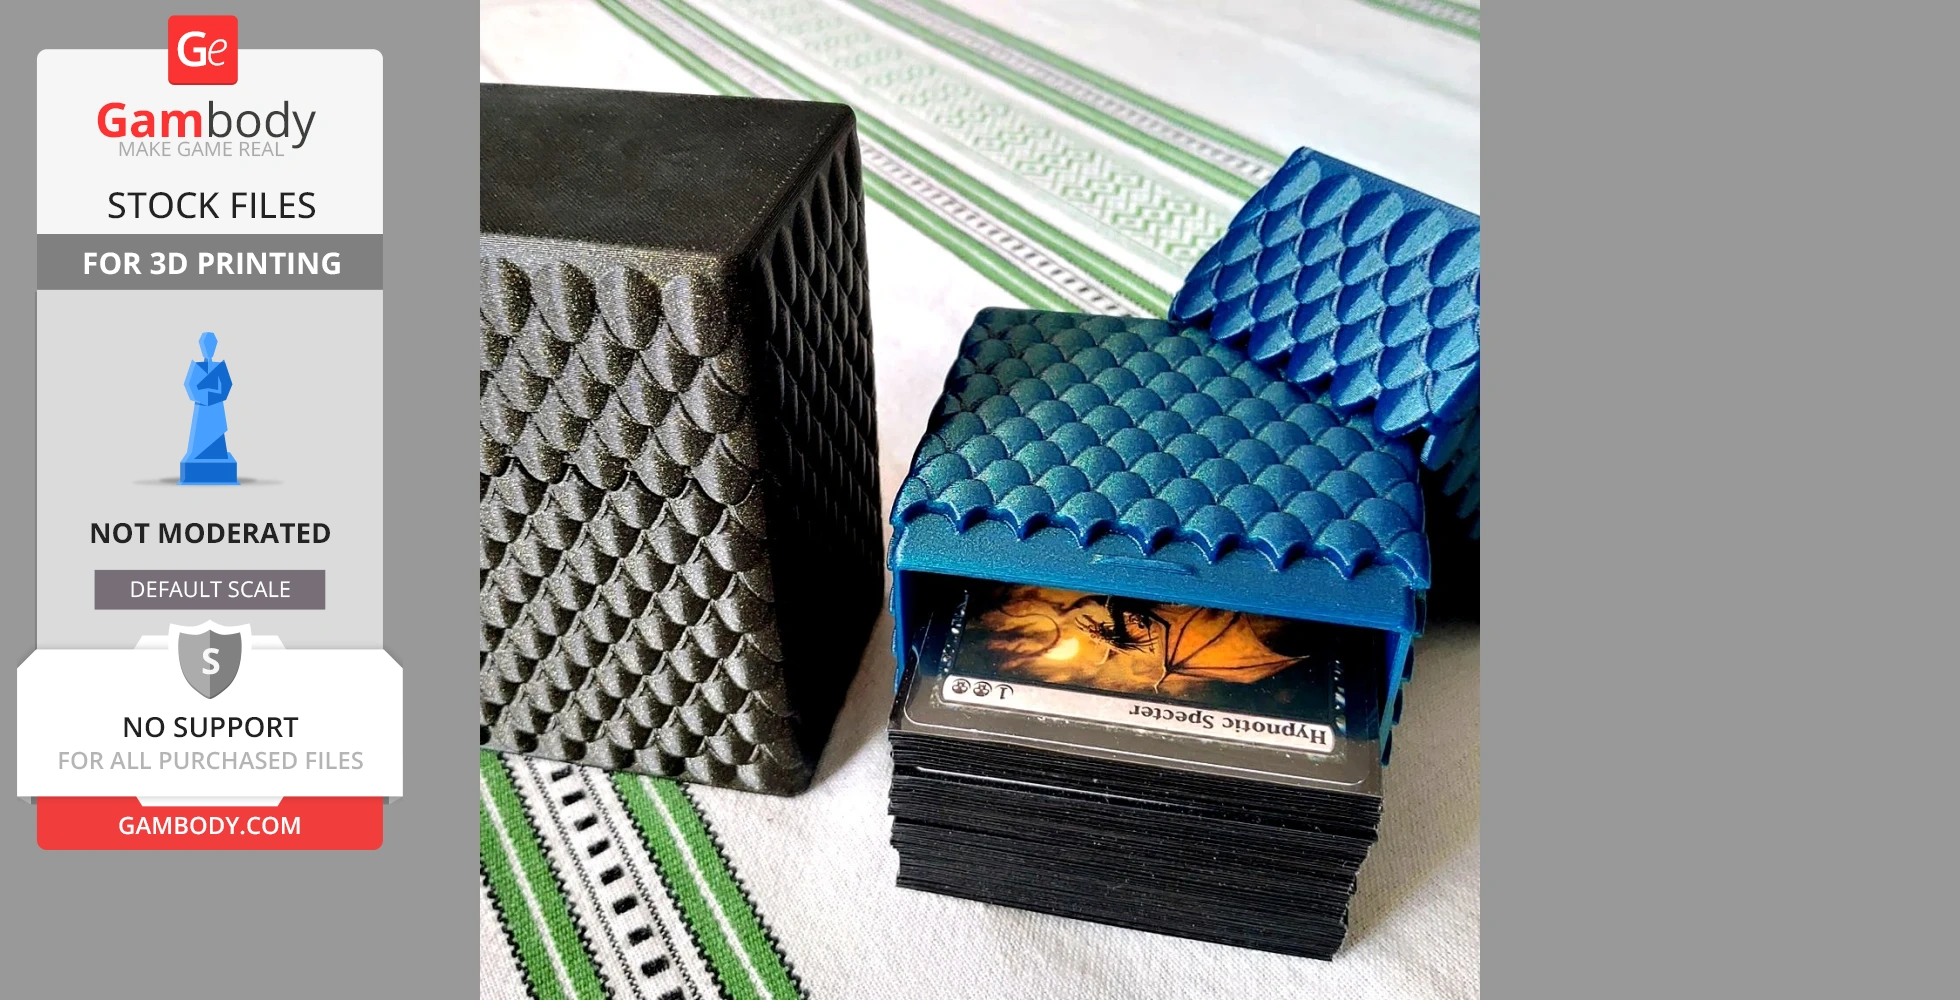 Buy Deck Box With Dragonscales for Magic the Gathering or Storage